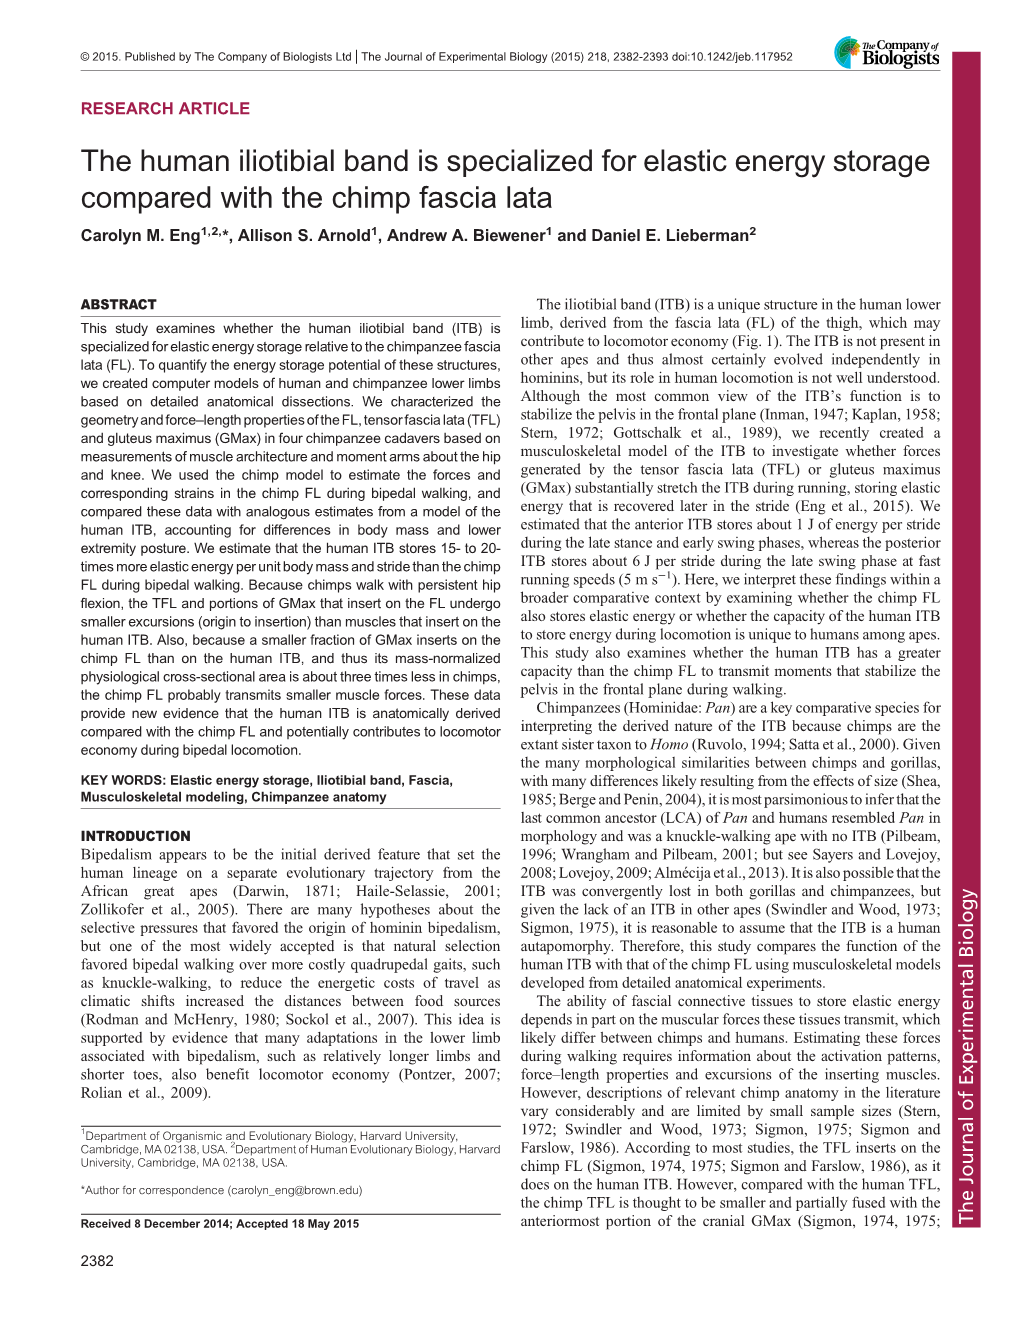 The Human Iliotibial Band Is Specialized for Elastic Energy Storage Compared with the Chimp Fascia Lata Carolyn M